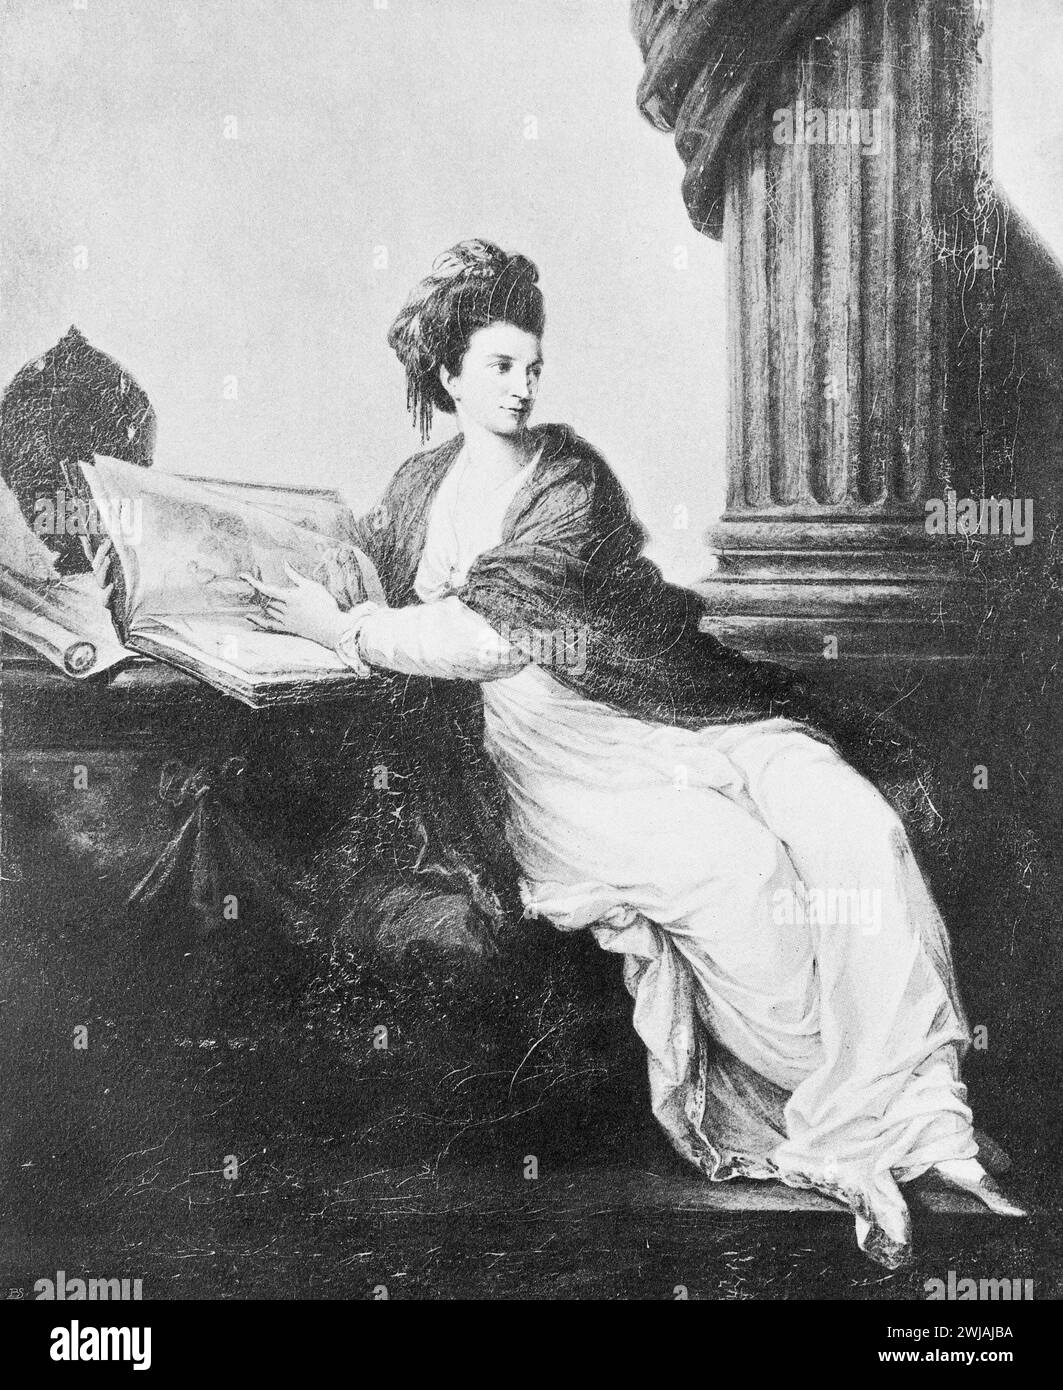 Portrait of Margaret Bingham, Countess of Lucan (1740 – 27 February 1814), after a painting by Angelica Kauffmann, R.A. Black and White Illustration from the Connoisseur, an Illustrated Magazine for Collectors Voll 3 (May-Aug 1902) published in London. Stock Photo